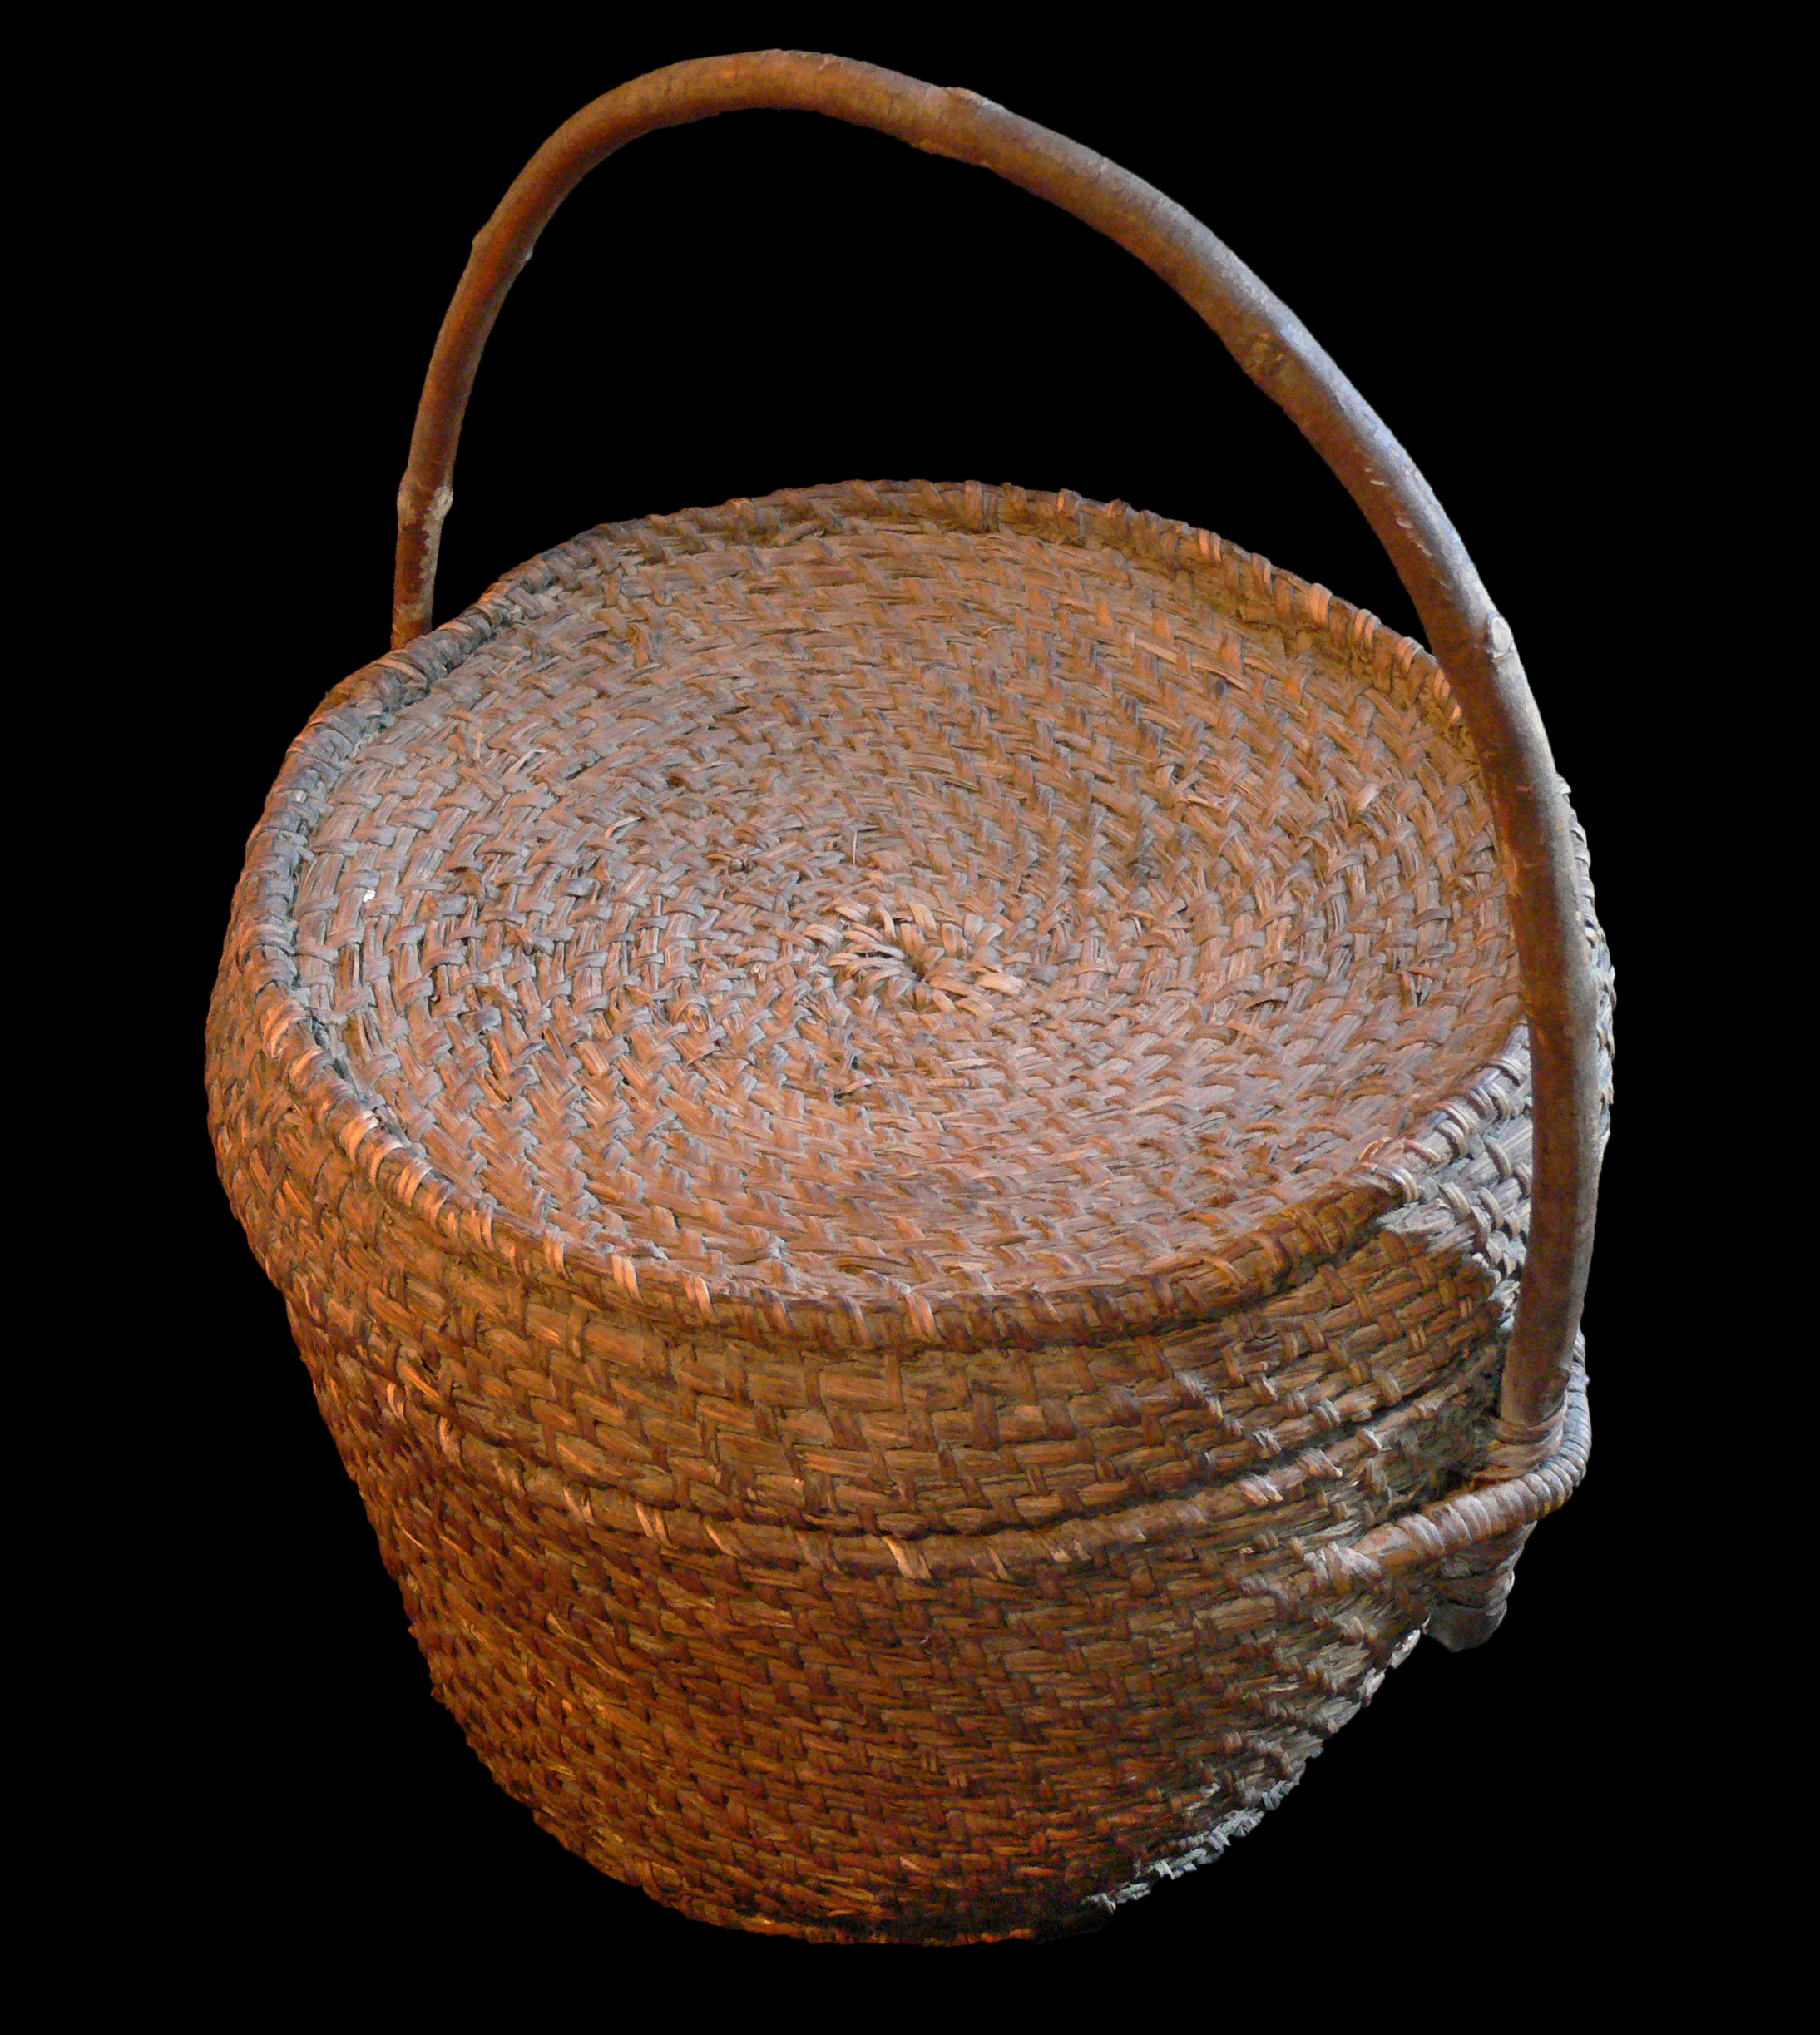 A woven wooden morel basket with a woven lid. There is an arched wooden handle attached to the sides.